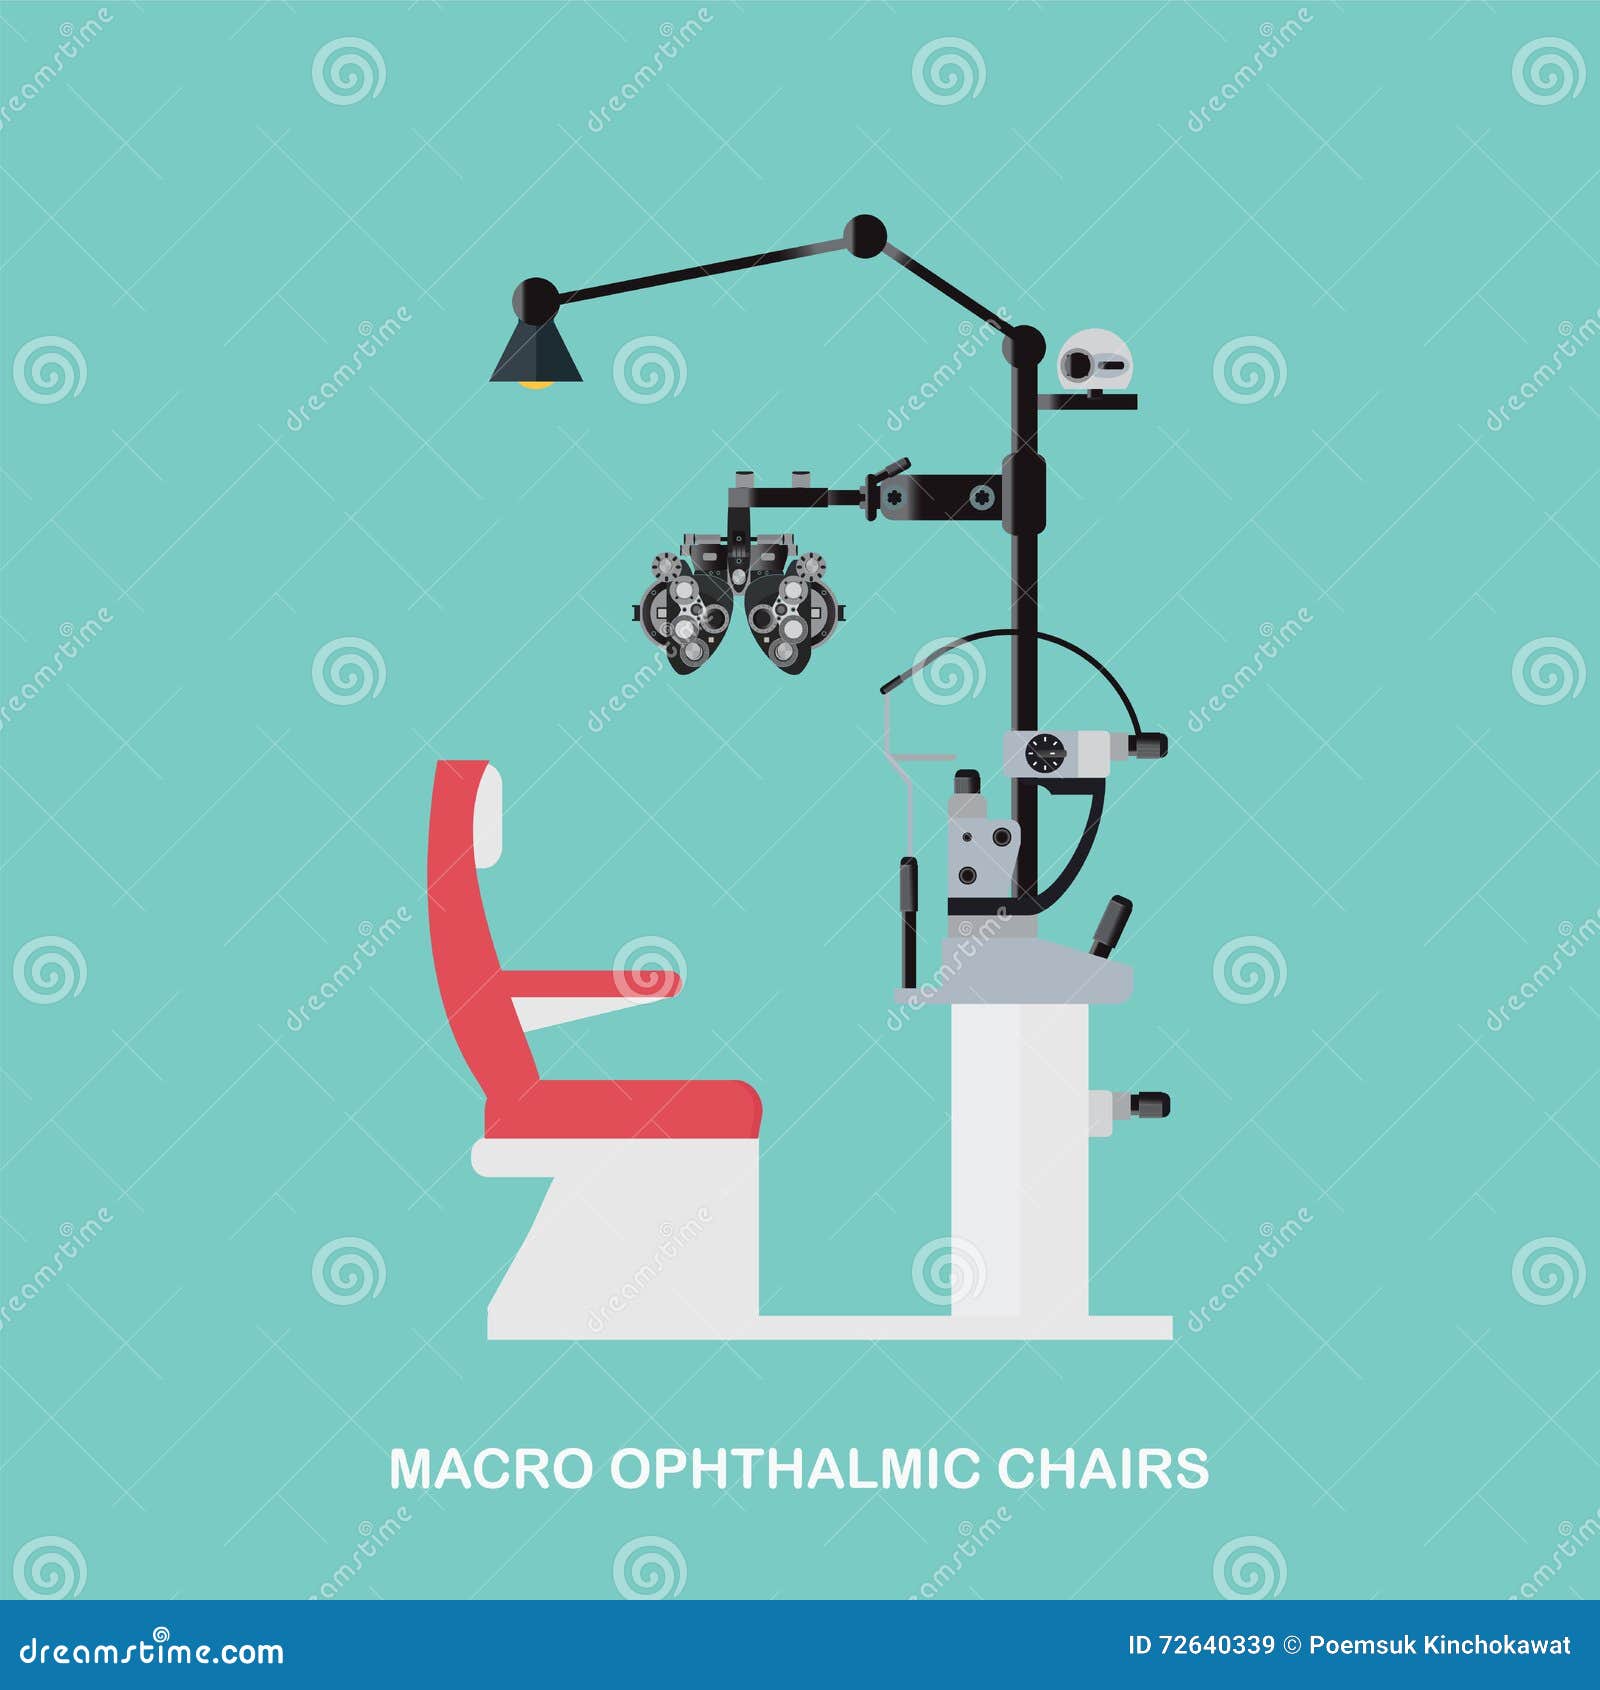 marco ophthalmic chairs.